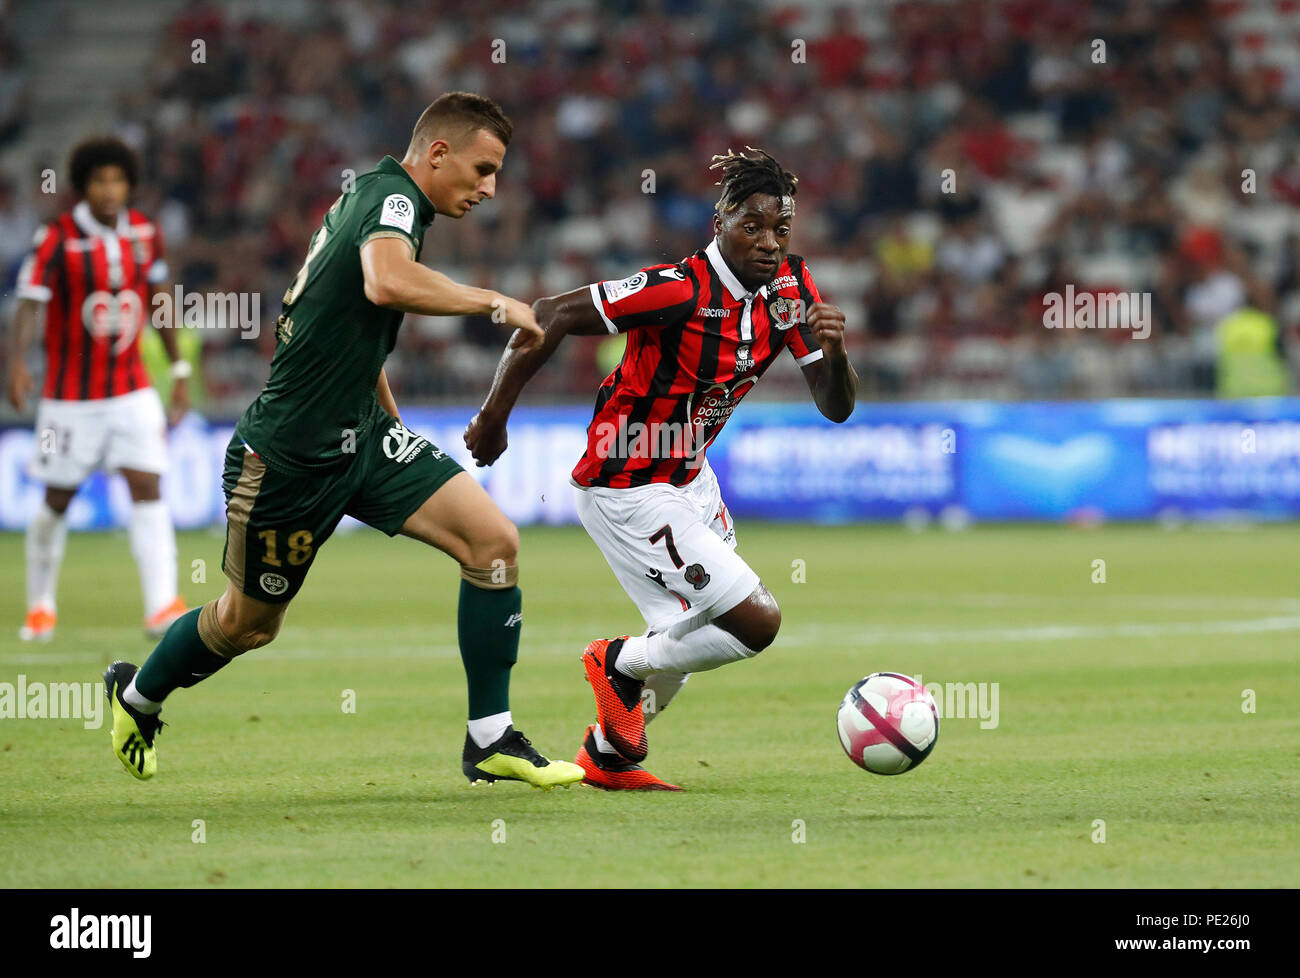 Nice, France. 11th Aug, 2018. Allan Saint-Maximin (R) of Nice vies with  Remi Oudin of Reims during the French Ligue 1 football match 2018-19 season  1st round in Nice, France on Aug.